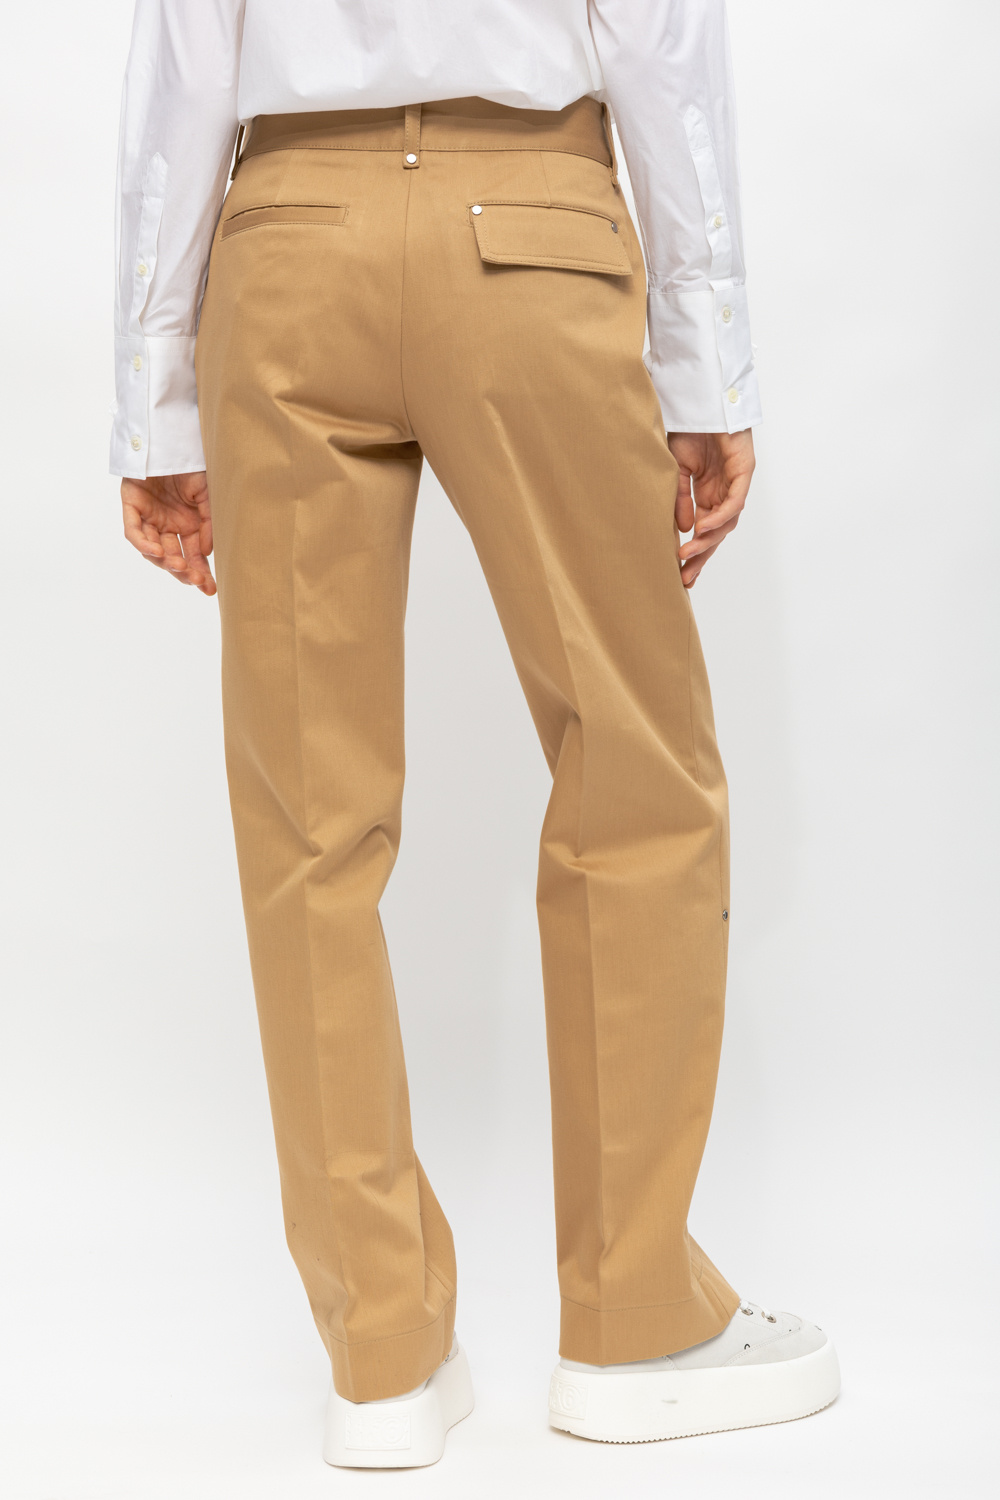 JW Anderson belted cotton trousers